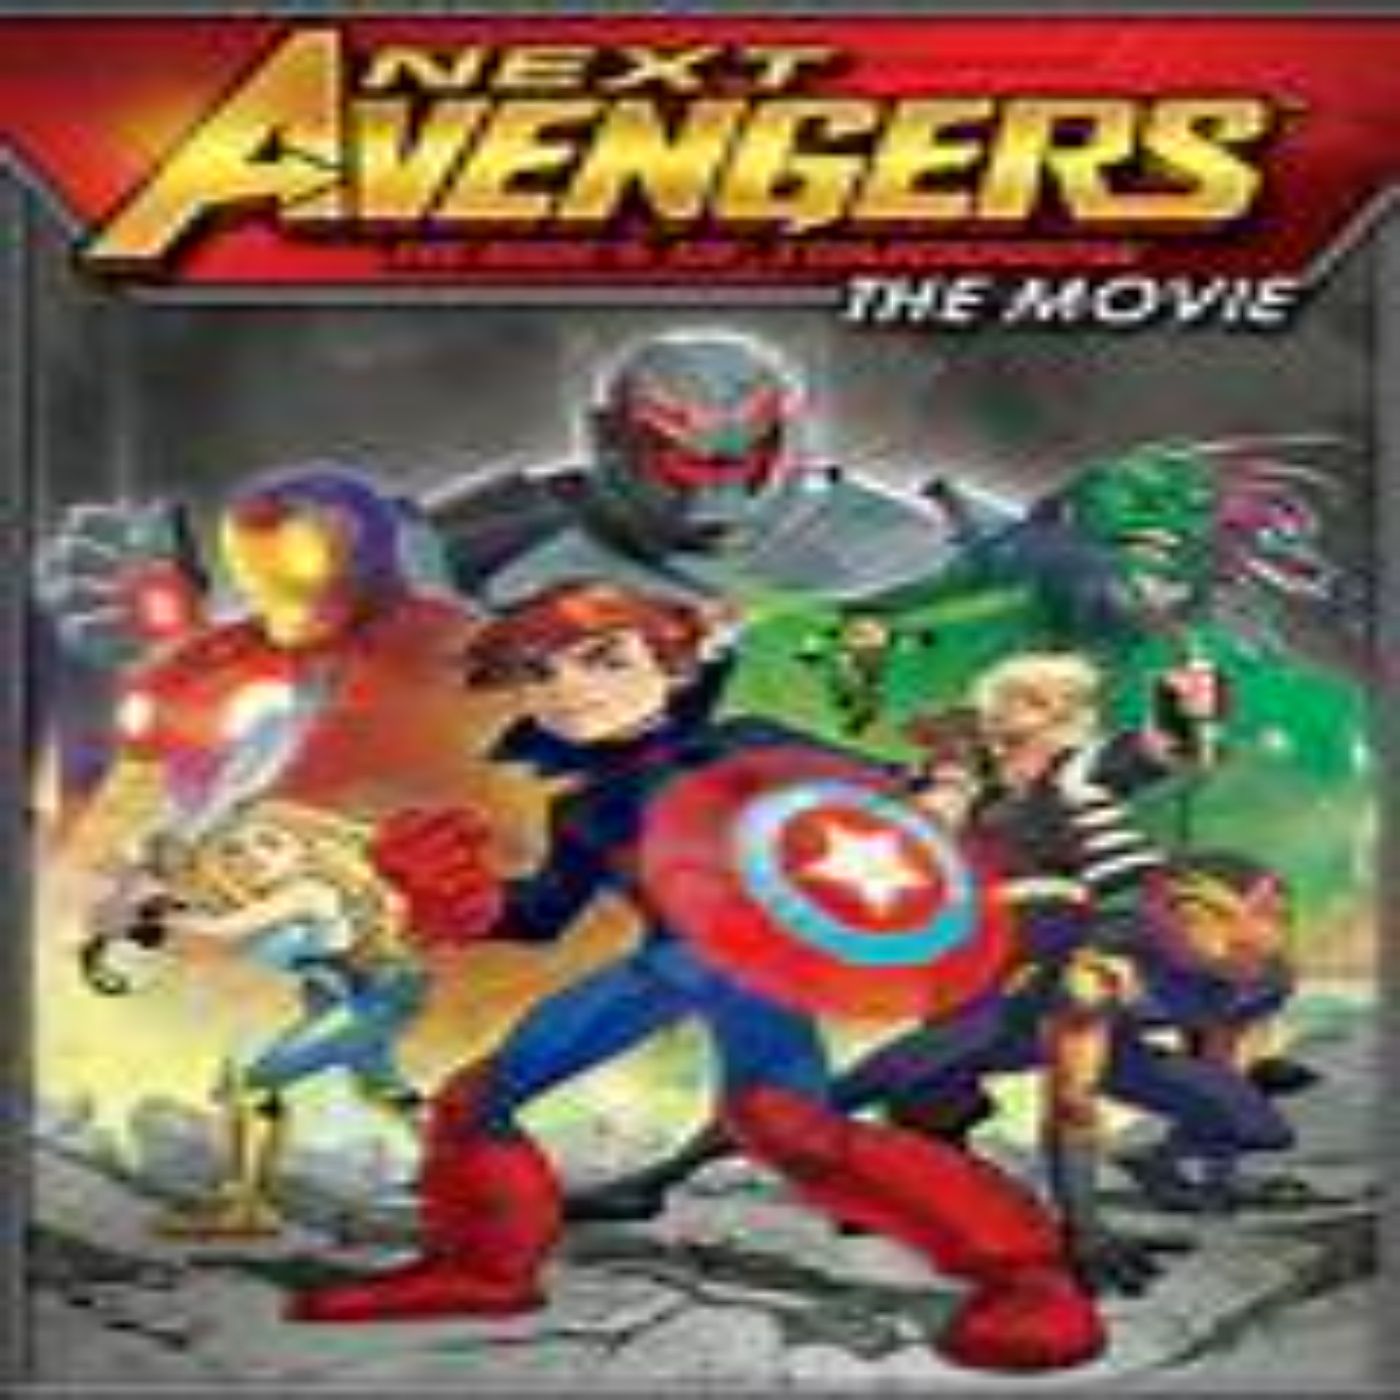 The Animation Nation-Next Avengers: Heroes of Tomorrow (2008) Review